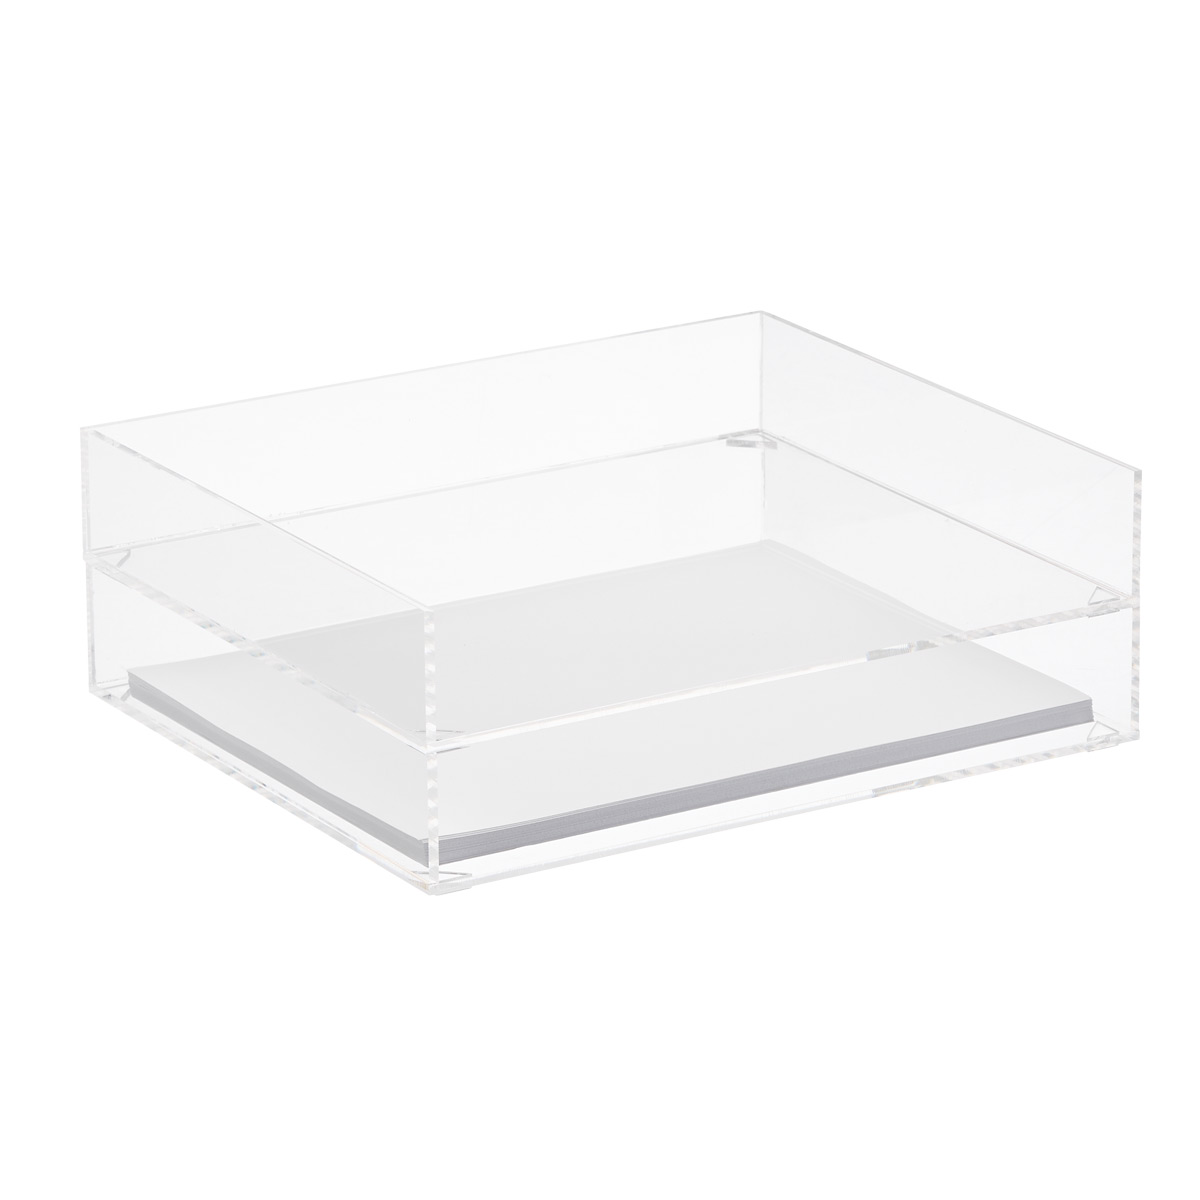 Kantek Double Letter Tray Two Tier Acrylic Clear AD15 